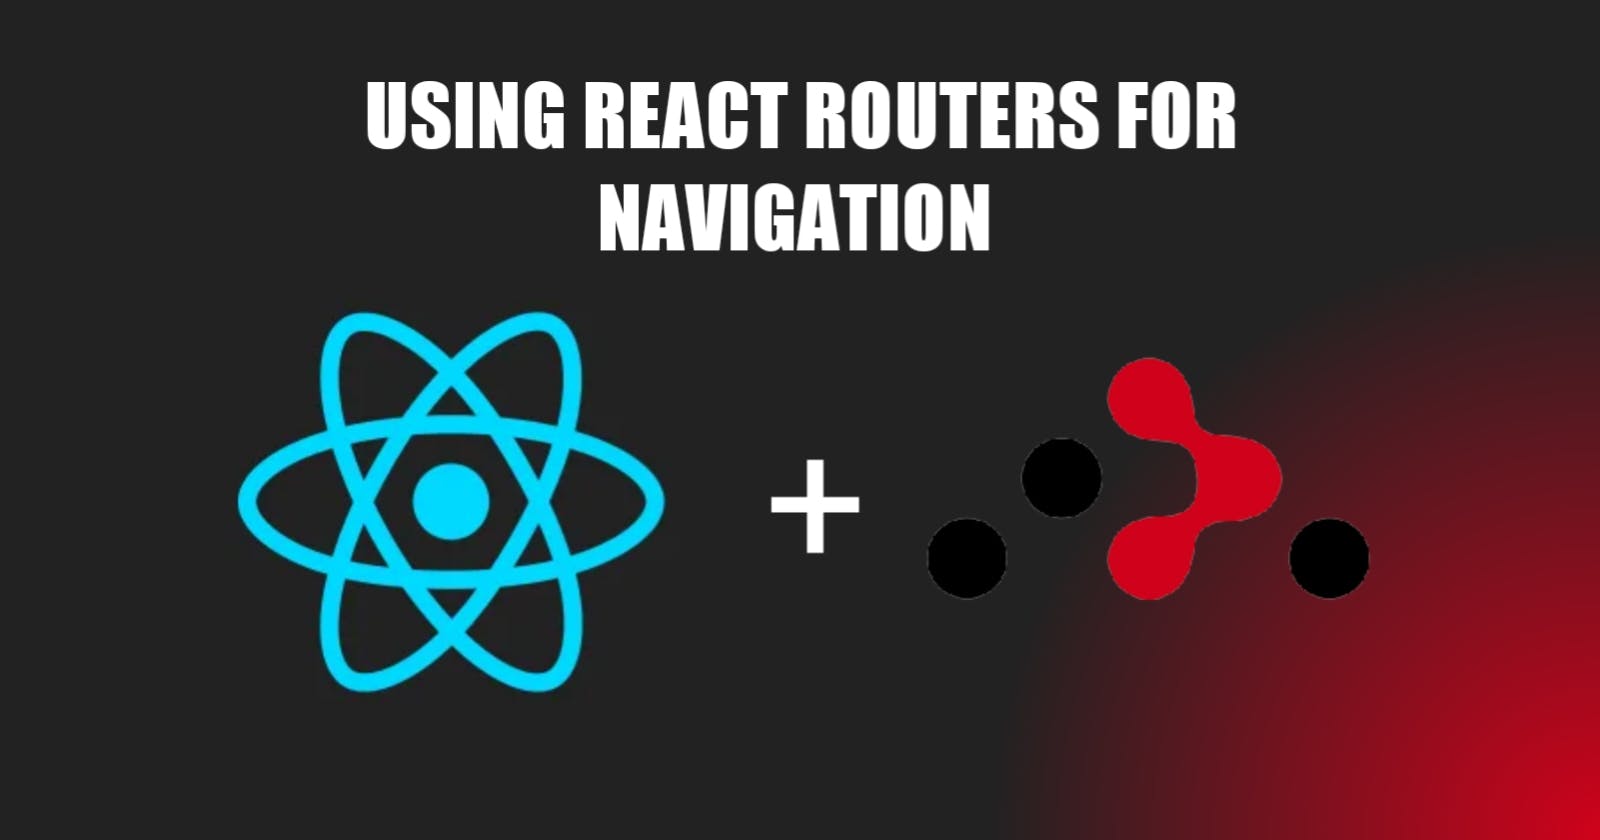 The Best Practices For Using React Routers For Navigation.